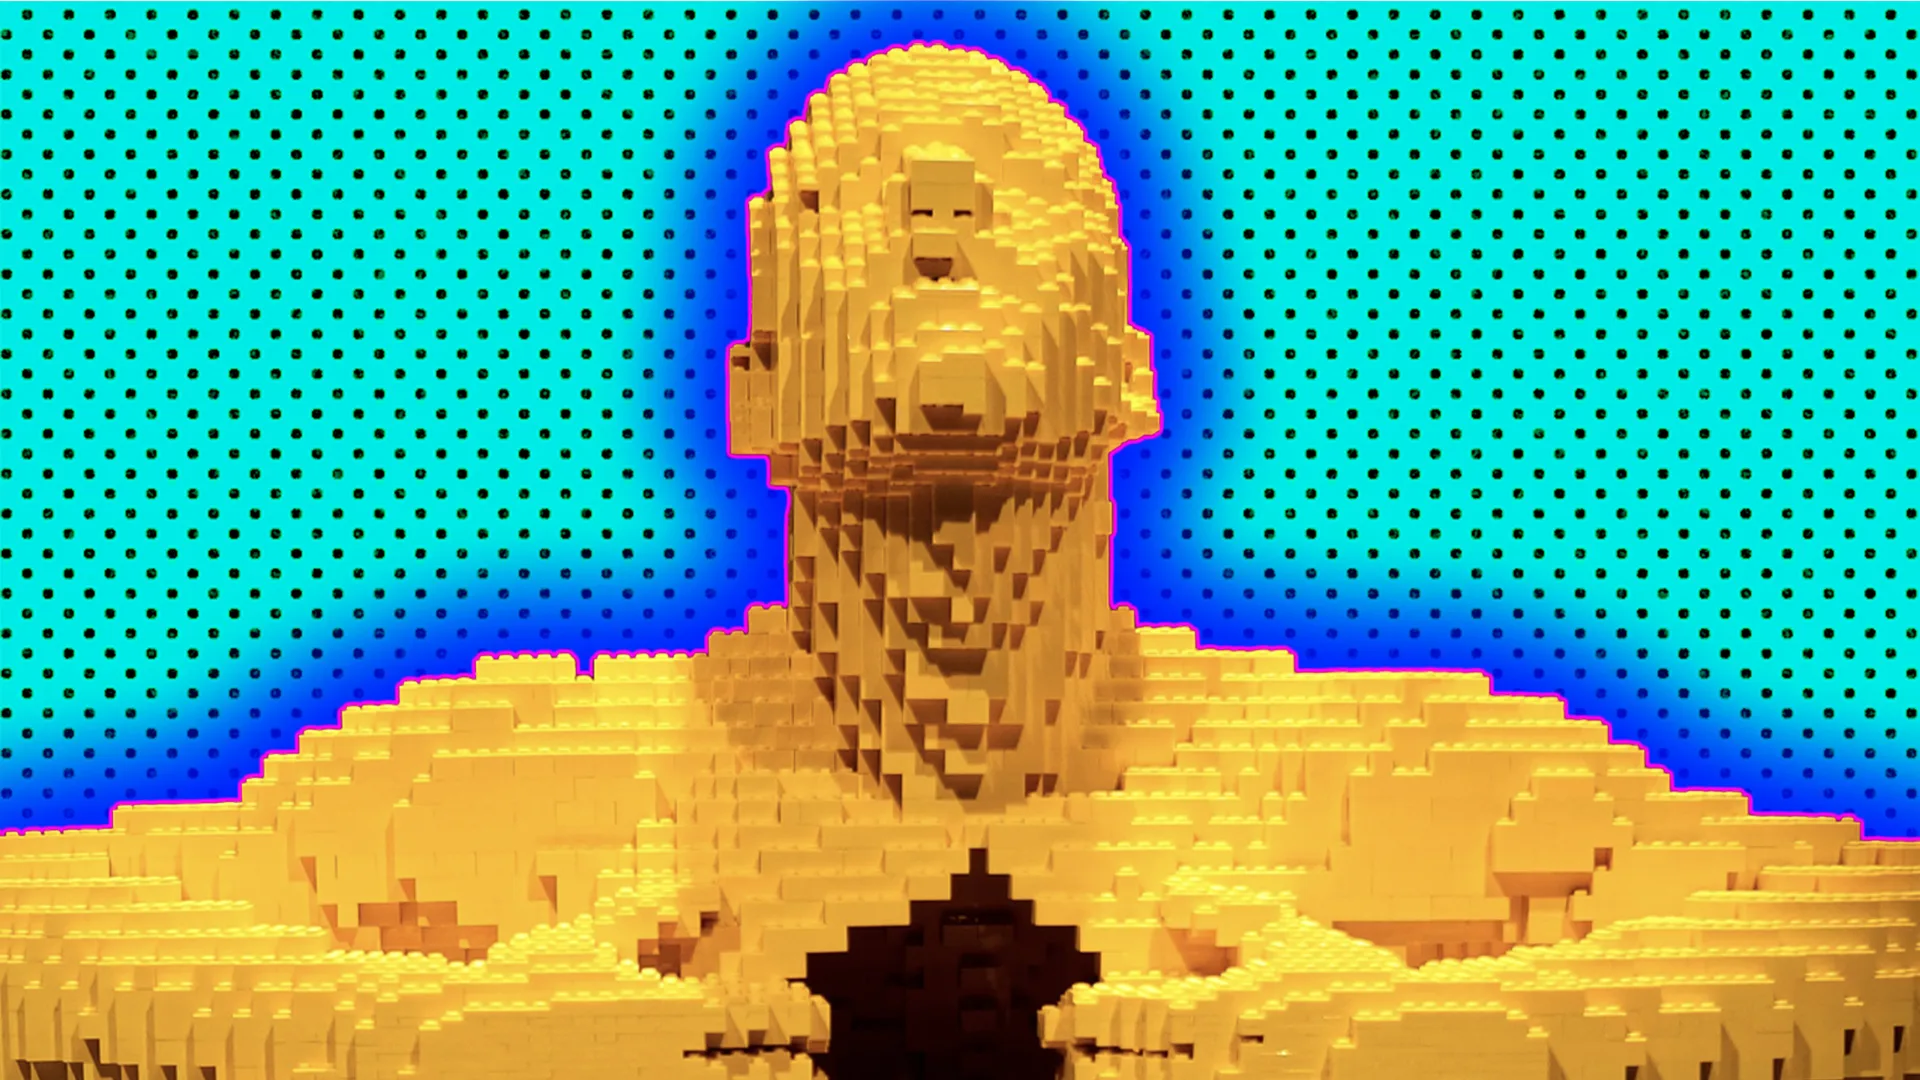 A human head and shoulders made out of yellow lego outlined by a blue halo effect on a turquoise spotty background